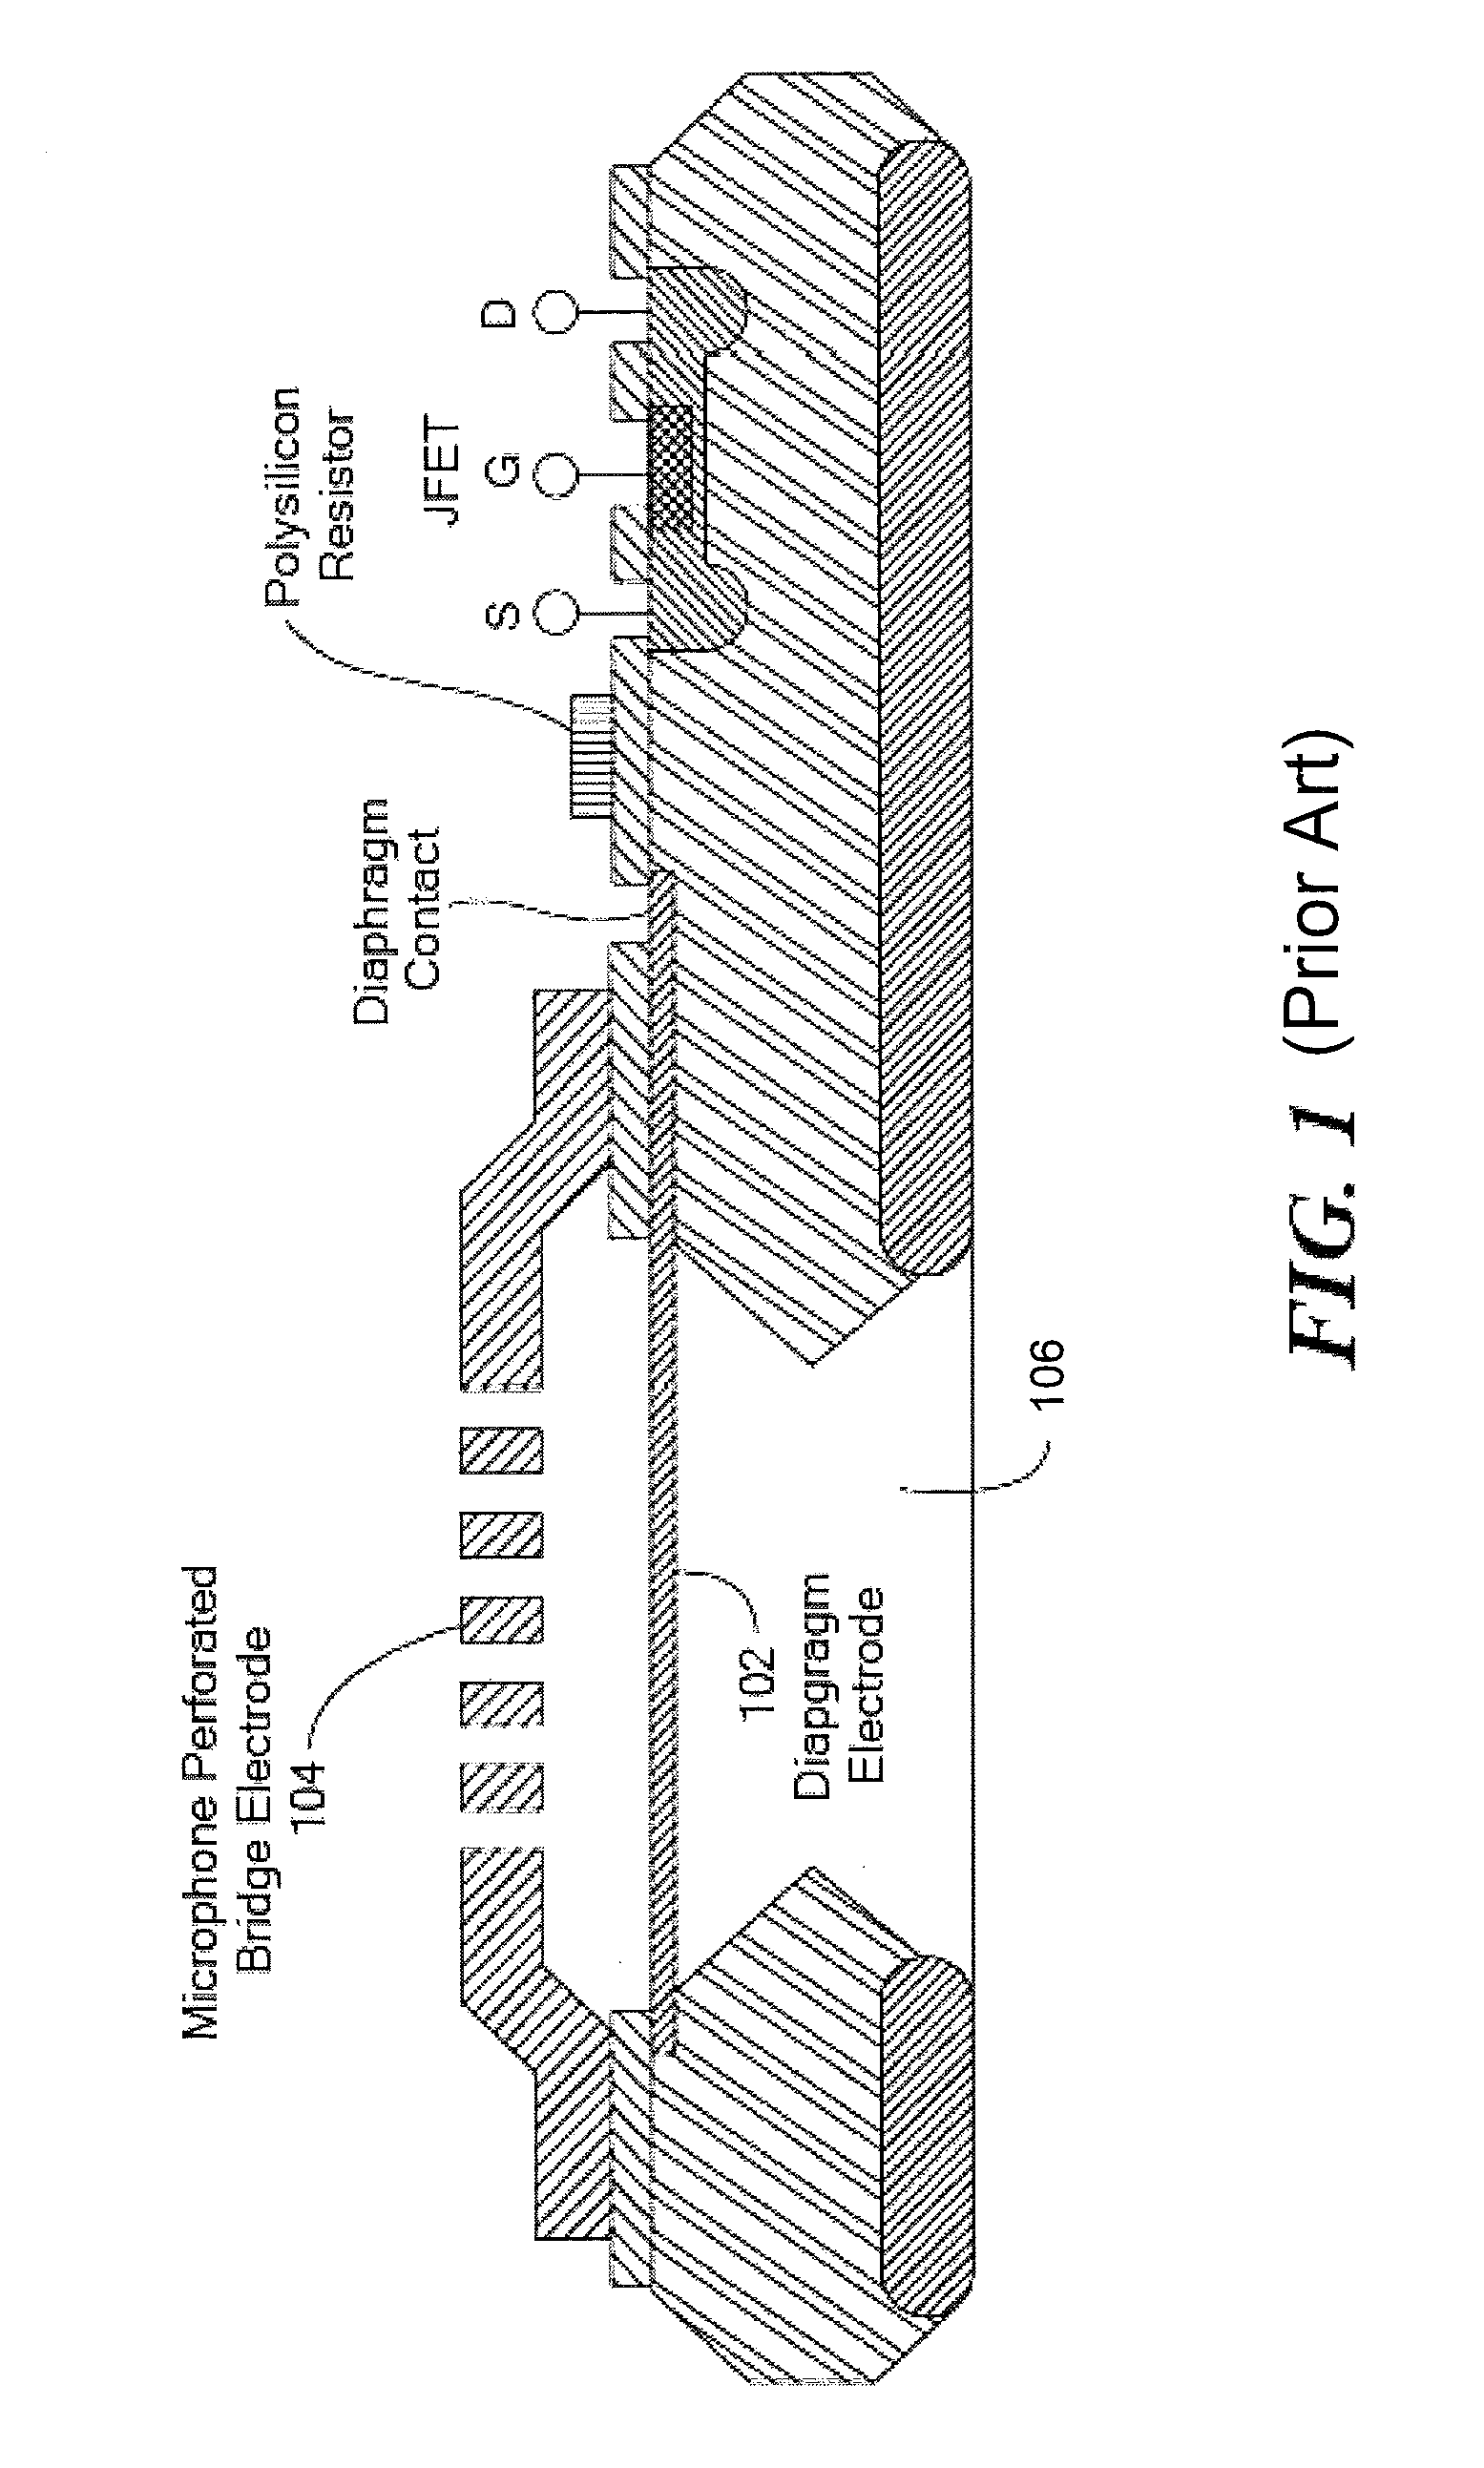 Support apparatus for microphone diaphragm